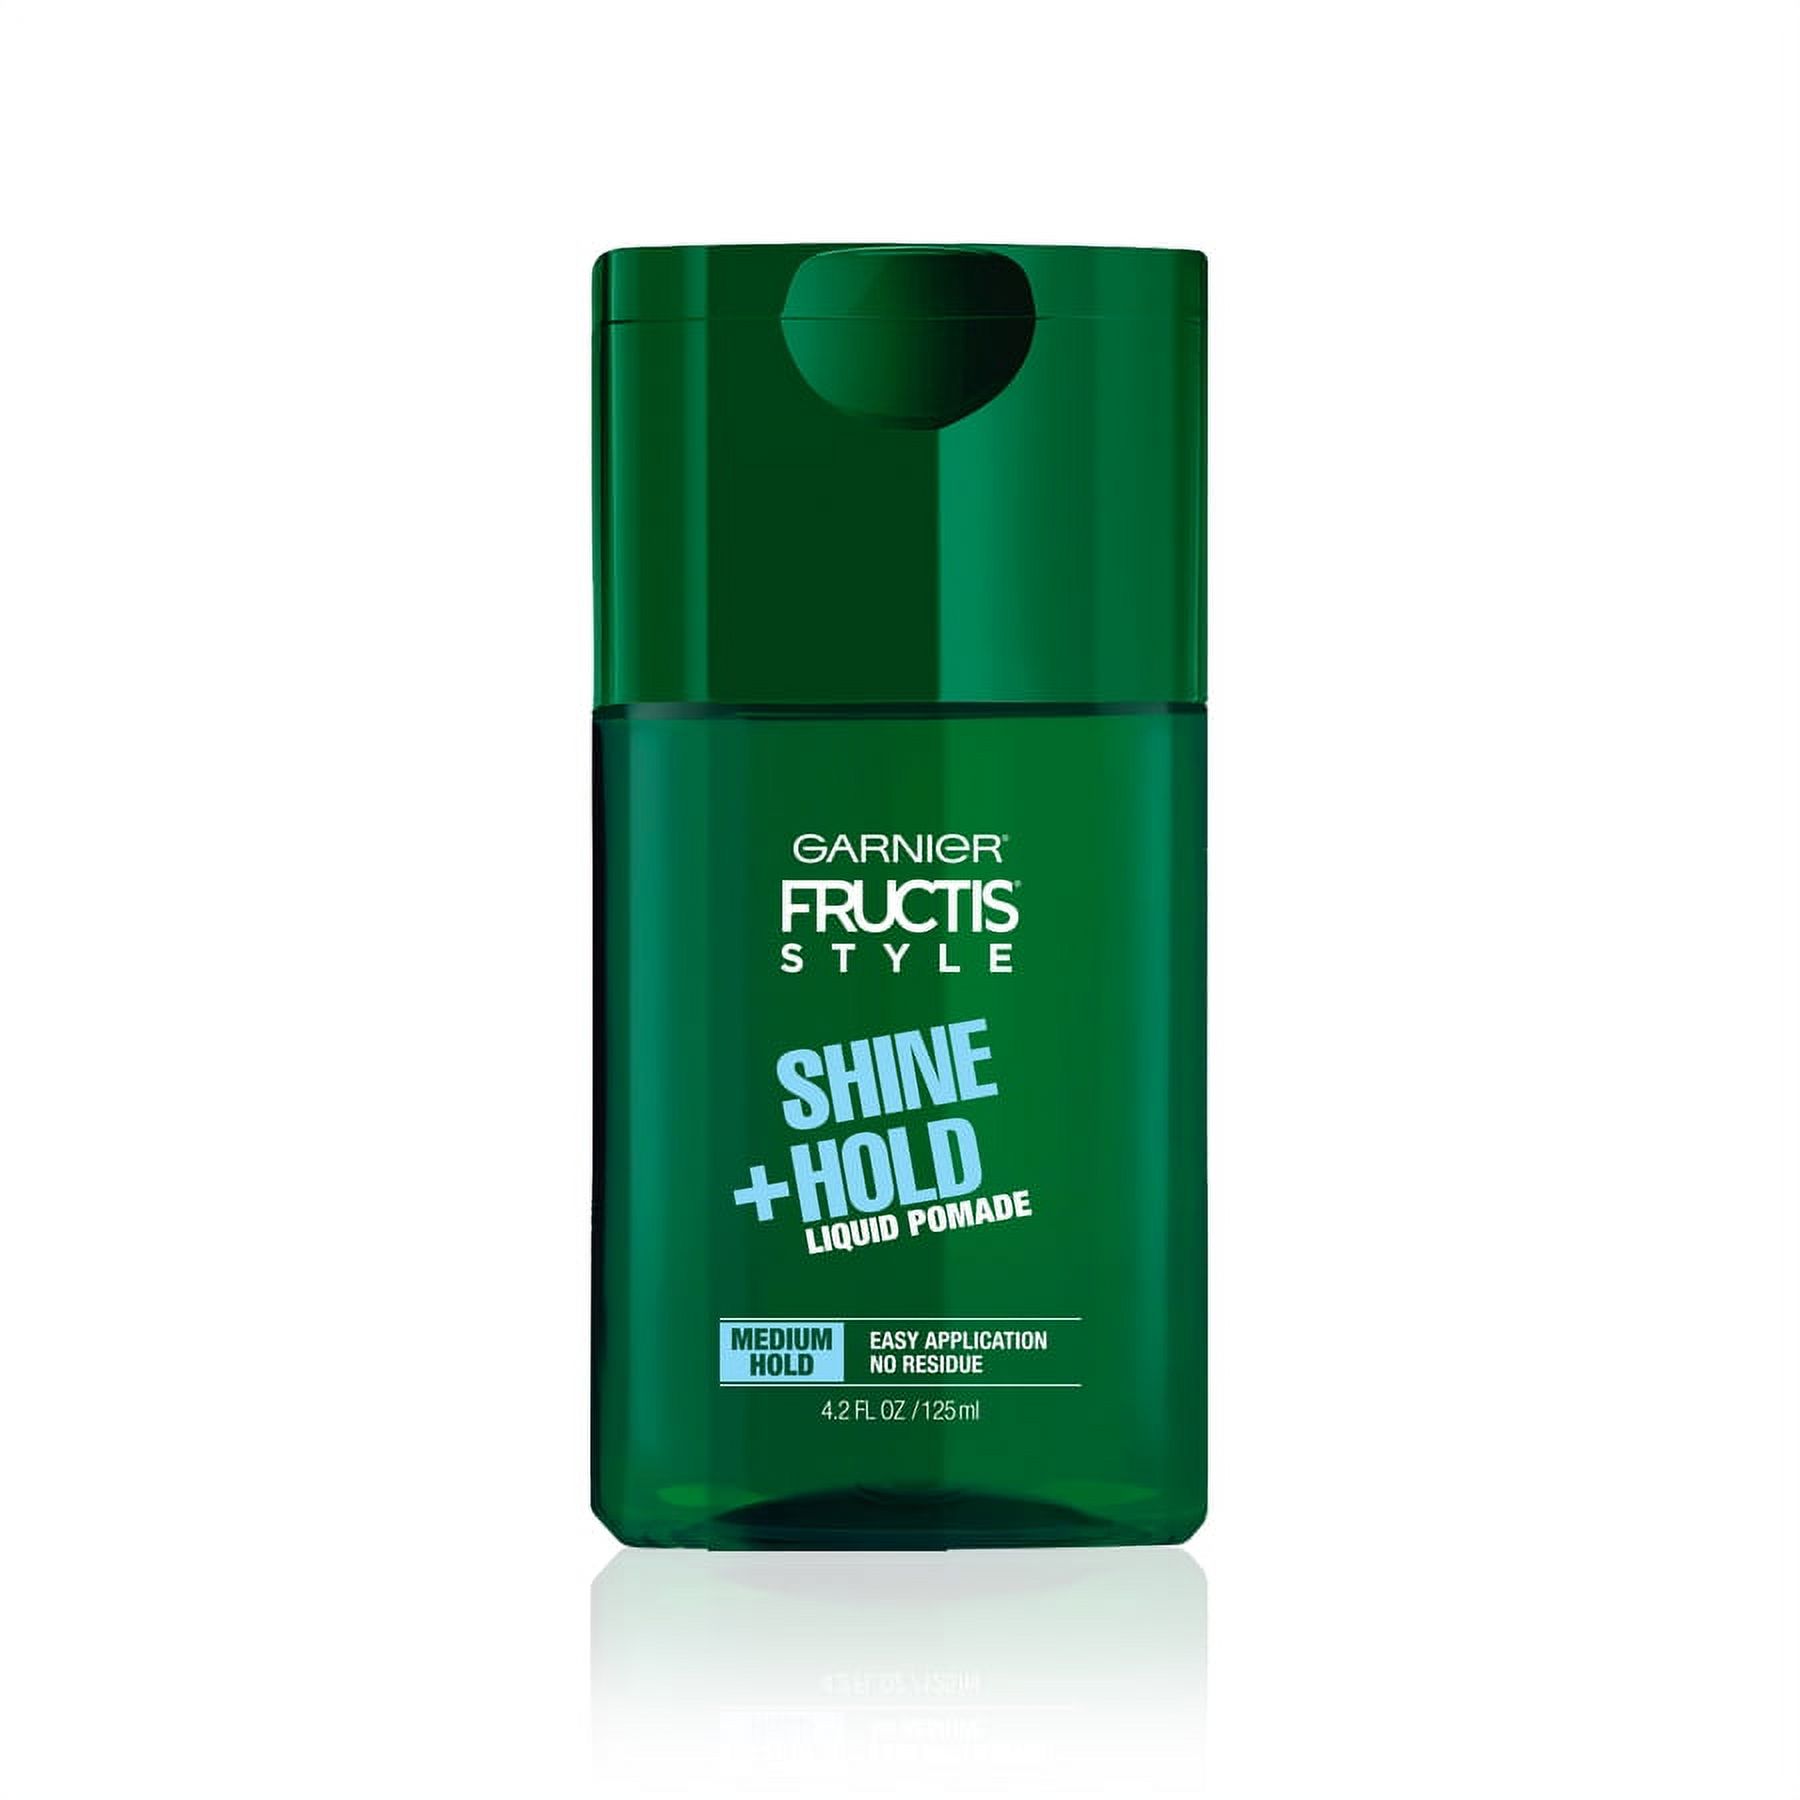 Garnier Fructis Style Shine and Hold Liquid Hair Pomade for Men, No Drying Alcohol, 4.2 oz. - image 1 of 8